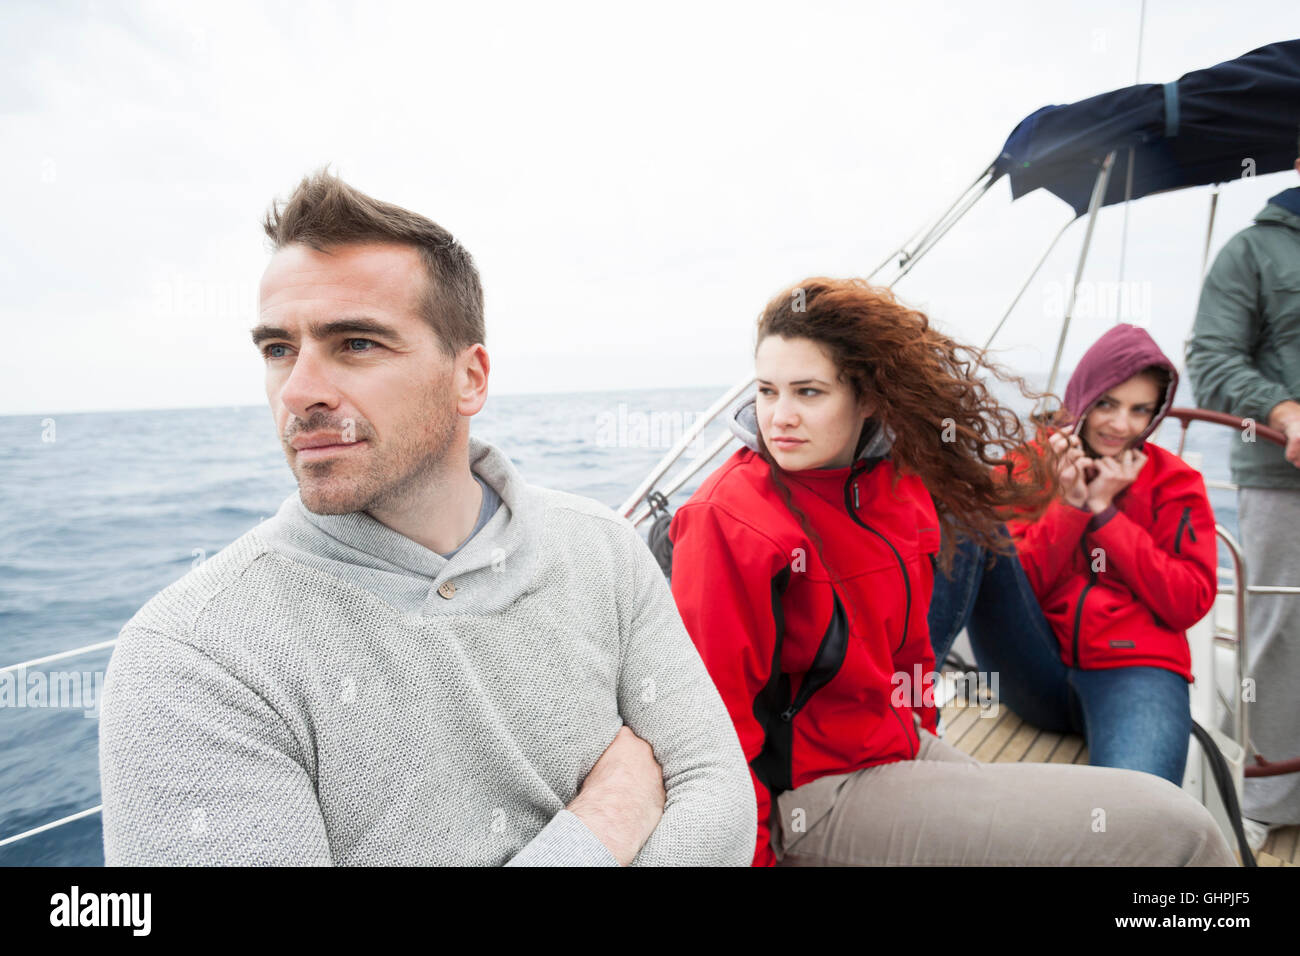 Group of friends on yacht looking out to sea Stock Photo